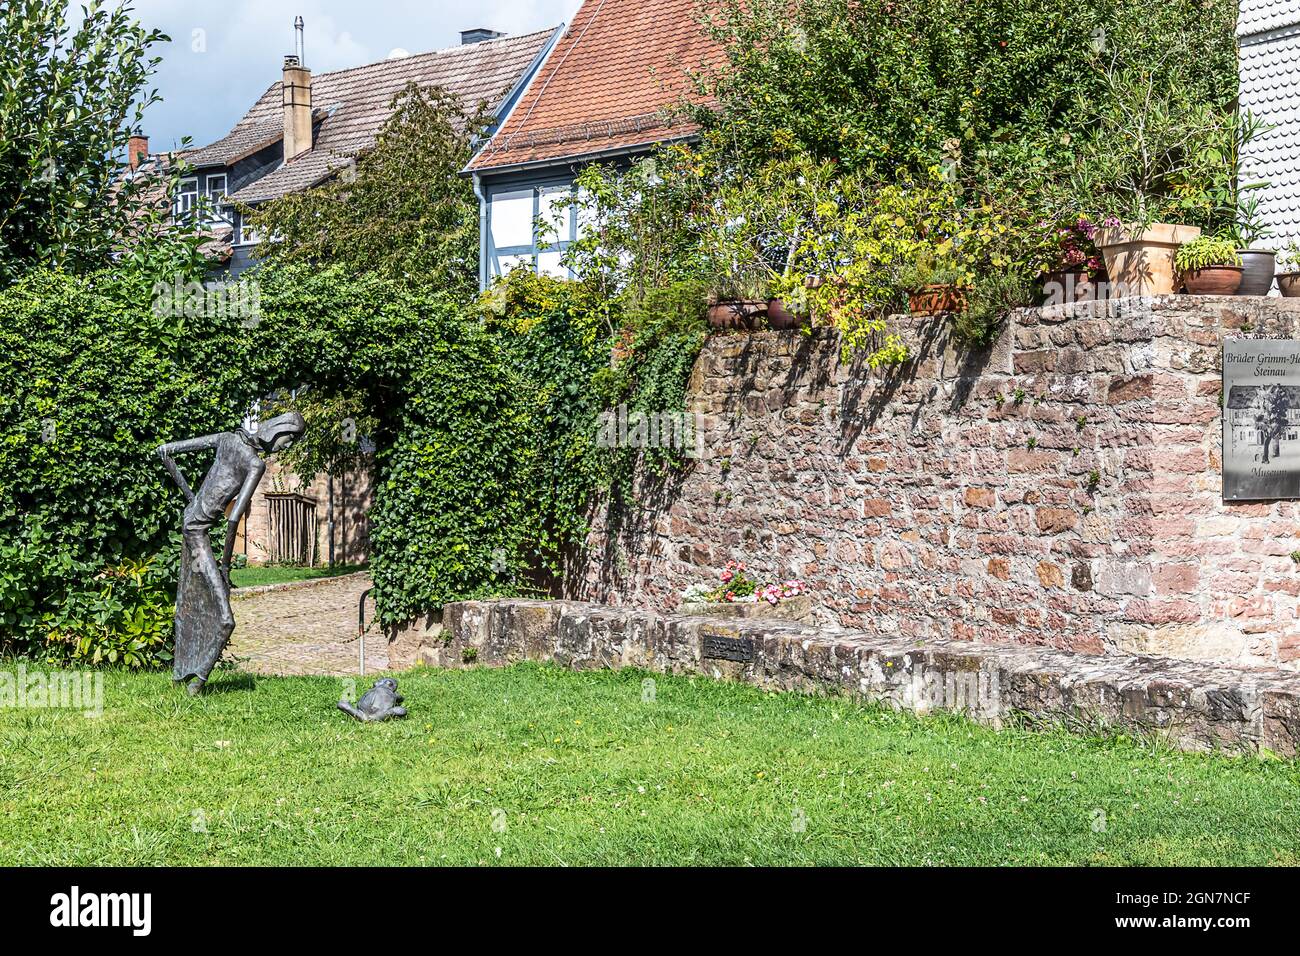 STEINAU AN DER STRASSE, GERMANY- SEPTEMBER 21, 2021: The front garden of the Birthplace of the Brothers Grimm.The Grimm family lived here 1791 - 1796. Stock Photo